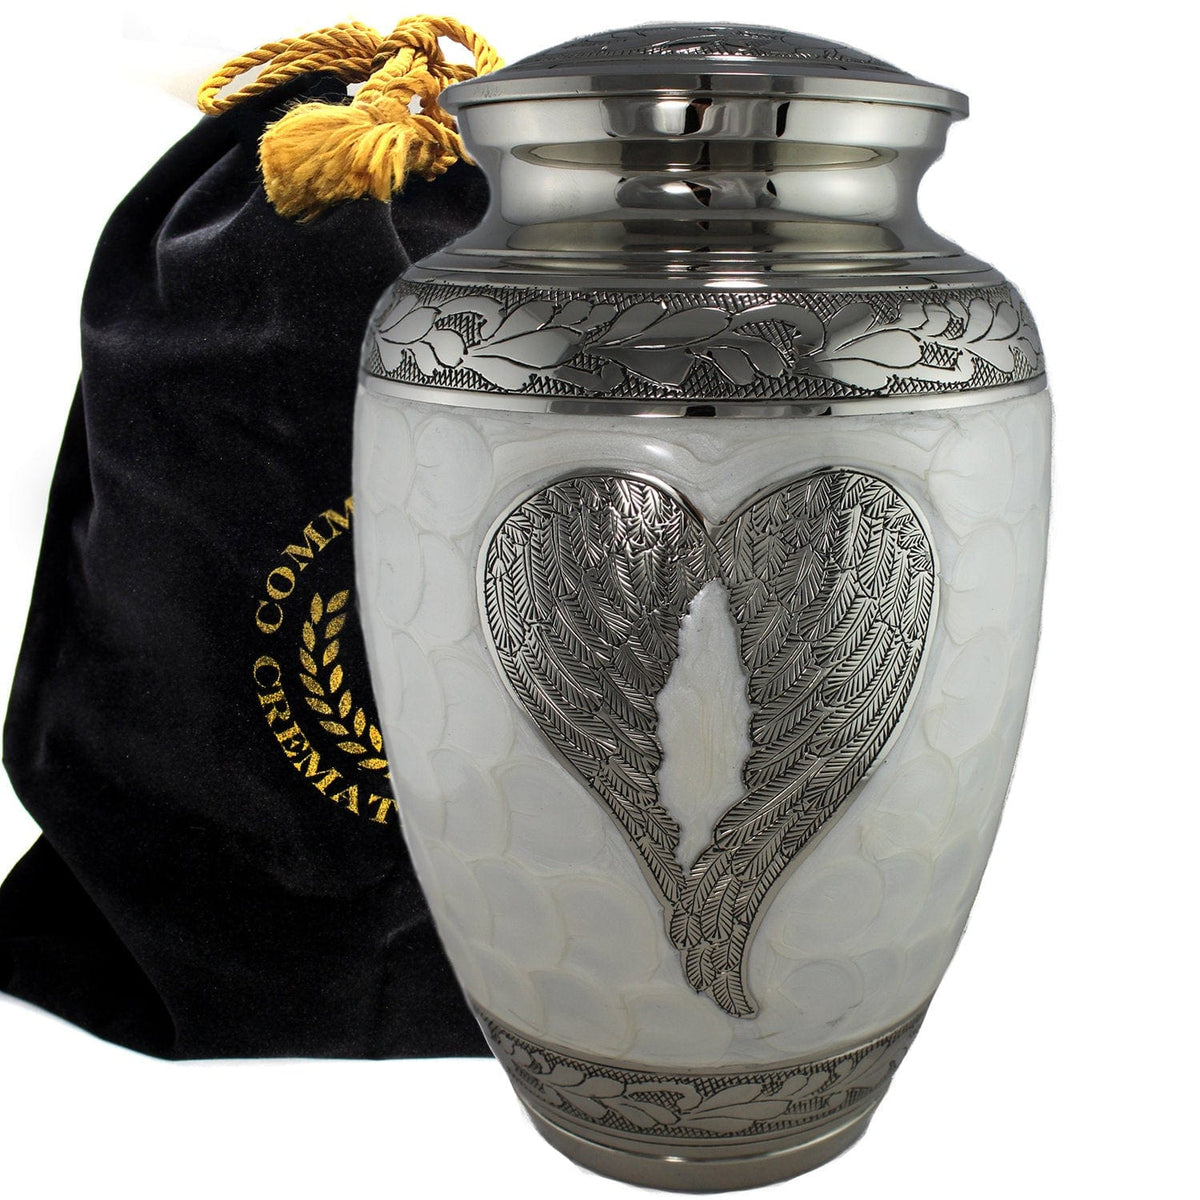 Commemorative Cremation Urns Home &amp; Garden Large Loving Angel Wings - White Cremation Urn